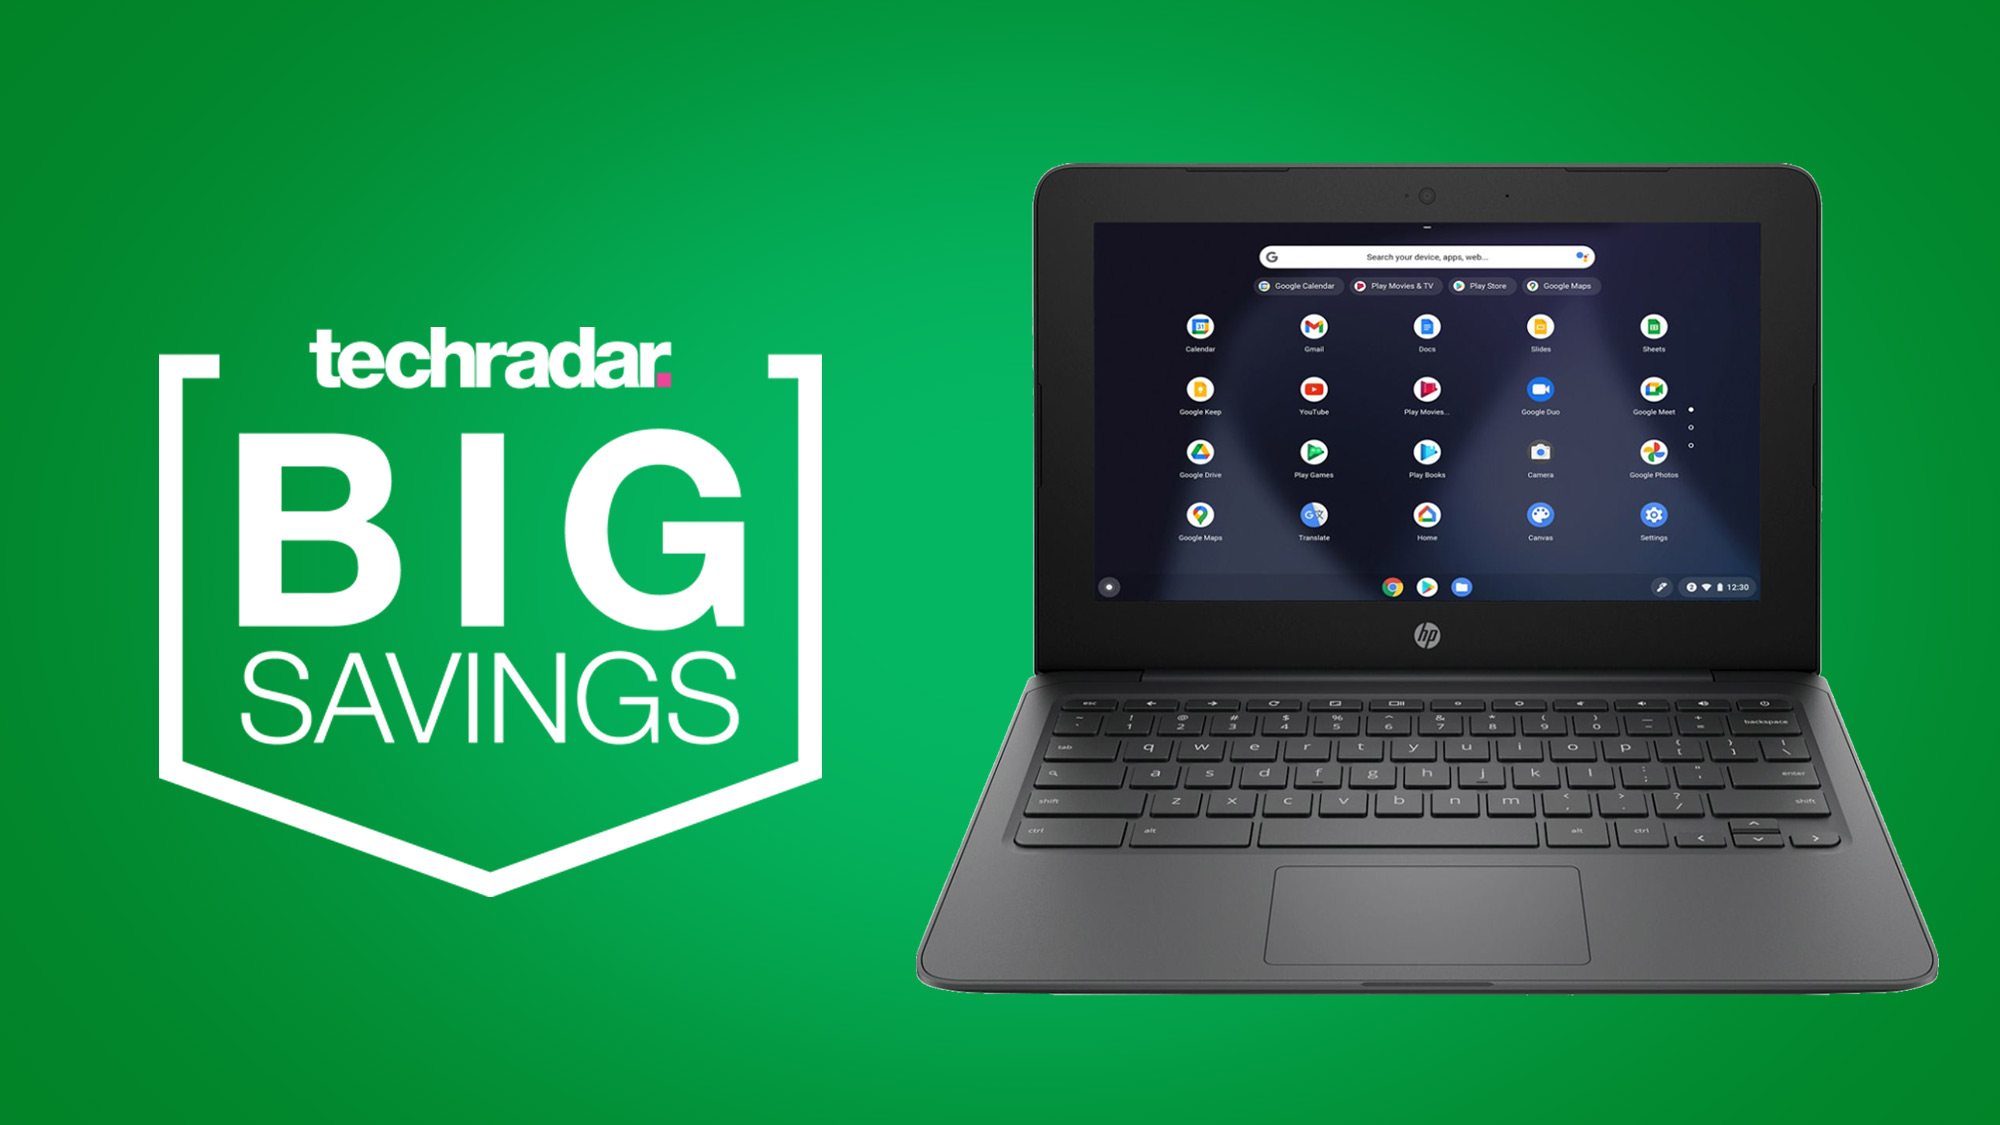 Walmart has a Chromebook for just $79 in its early Black Friday deals ...